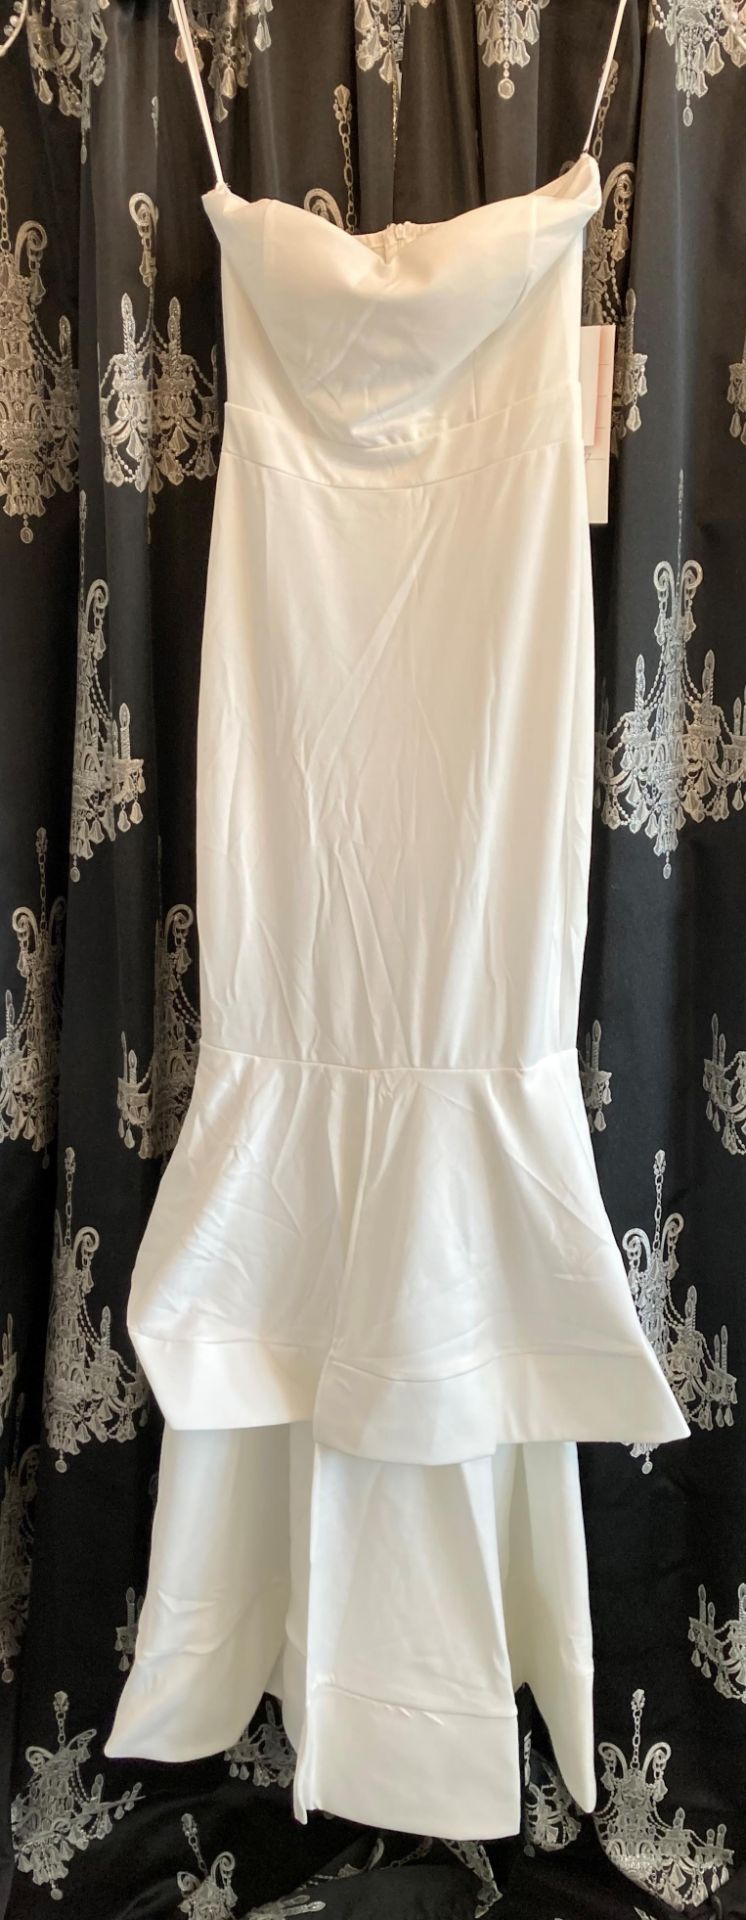 Ivory gown, size UK 8. To be collected from: The Gown Room, 46a Valley Road, Pudsey, LS28 9ER.